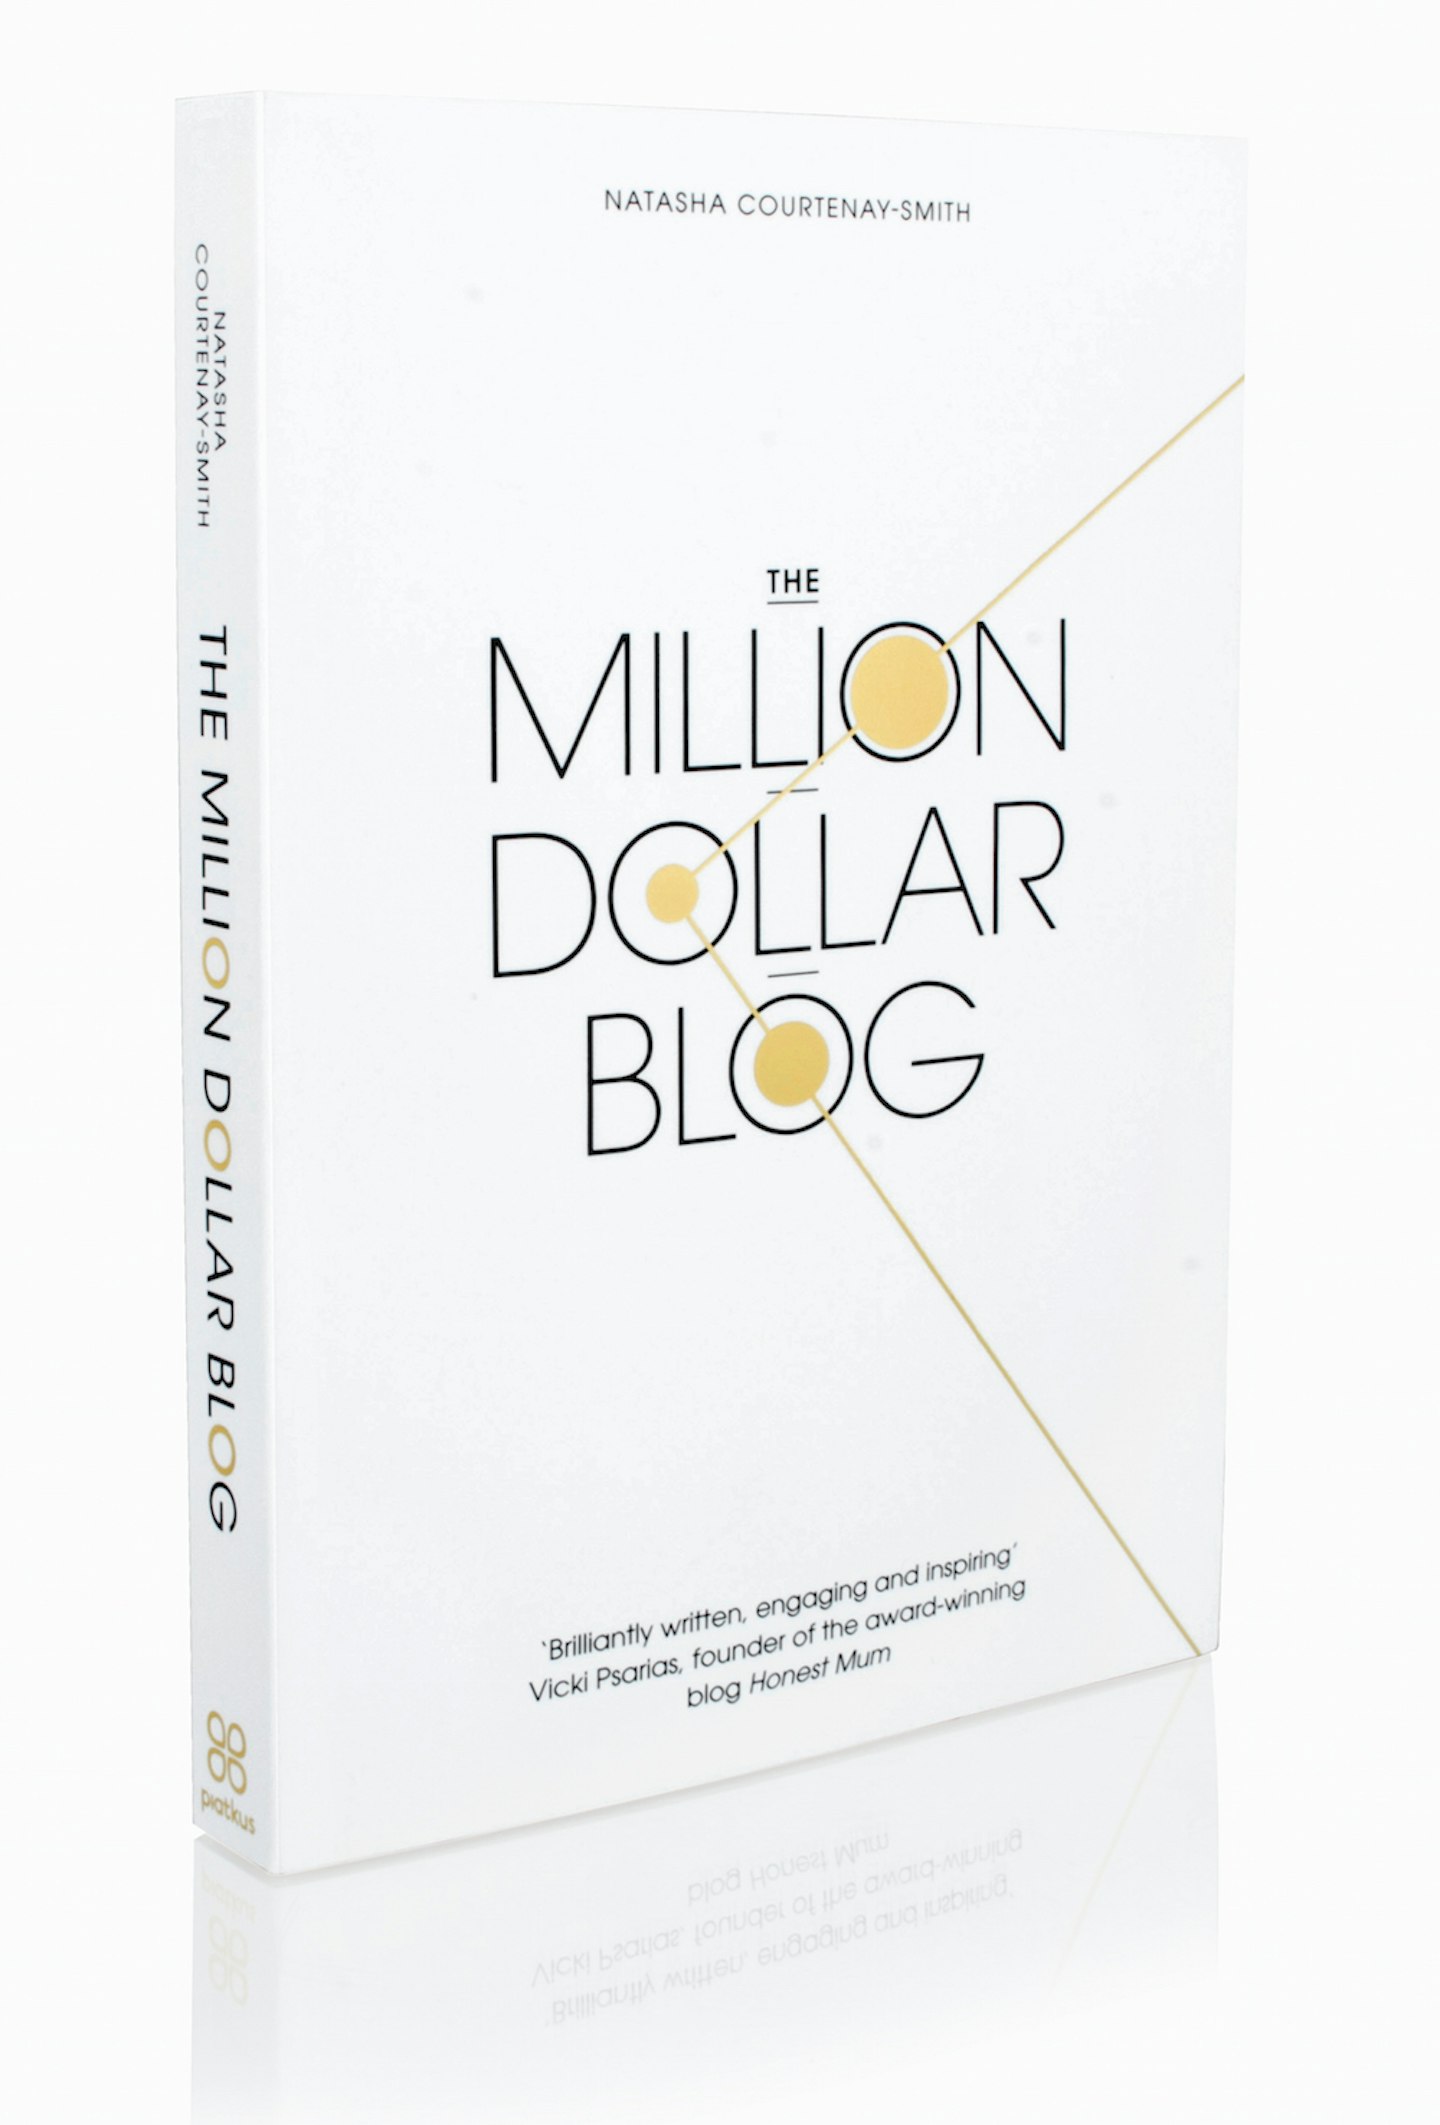 The Million Dollar Blog helps you get a foot on the blogging rung